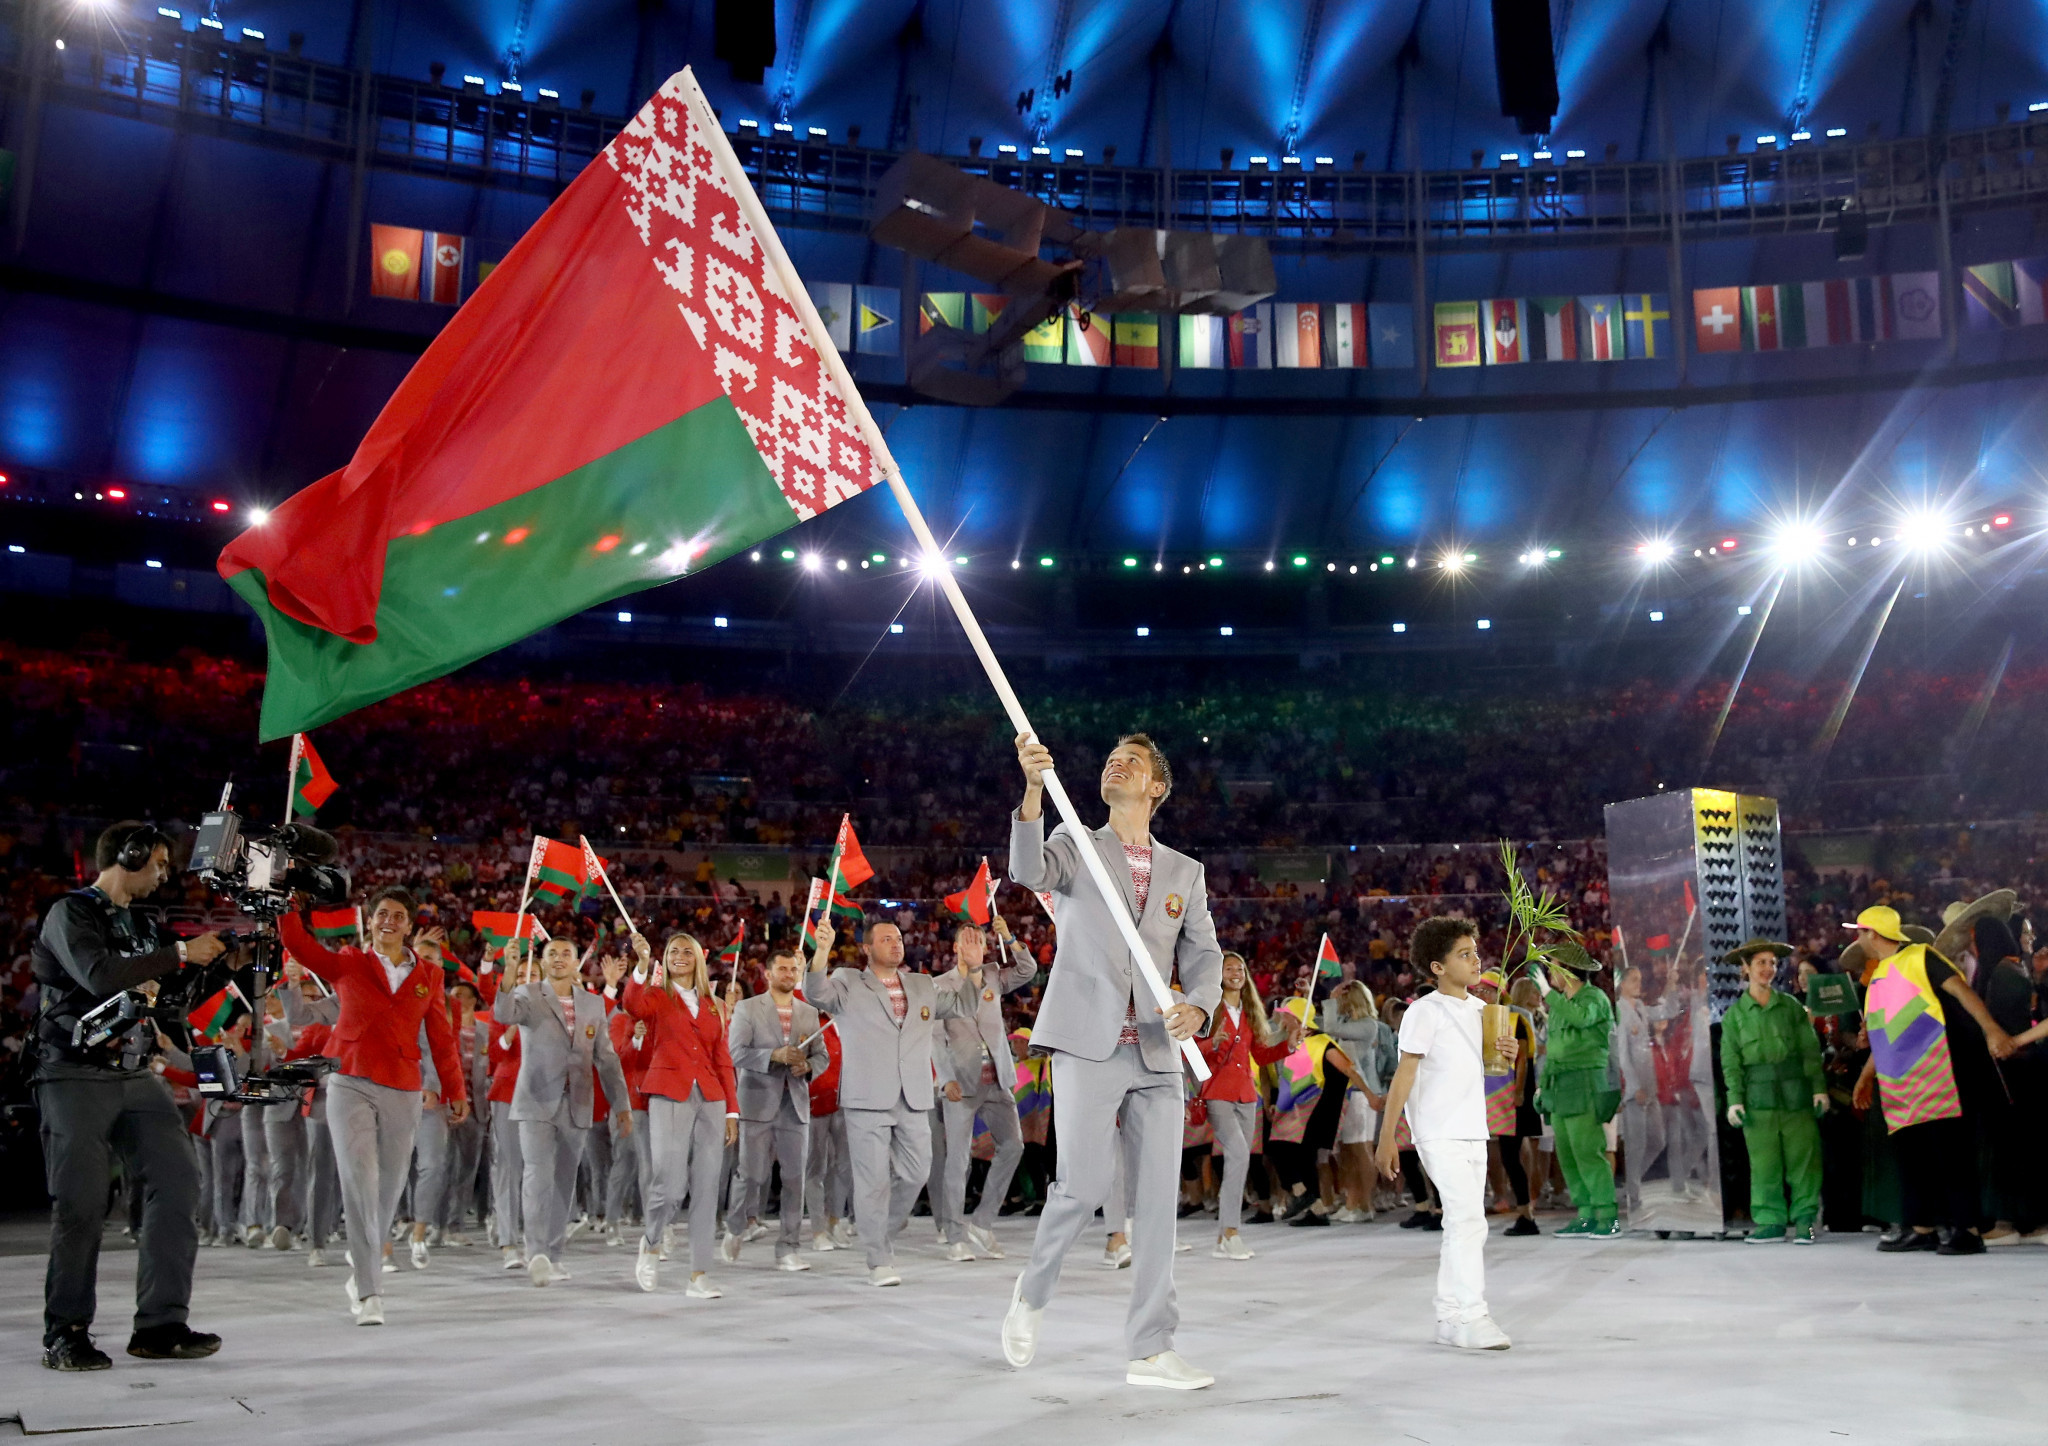 Forcing Belarus to compete under a neutral flag remains an option for the IOC should it choose to enforce further sanctions ©Getty Images